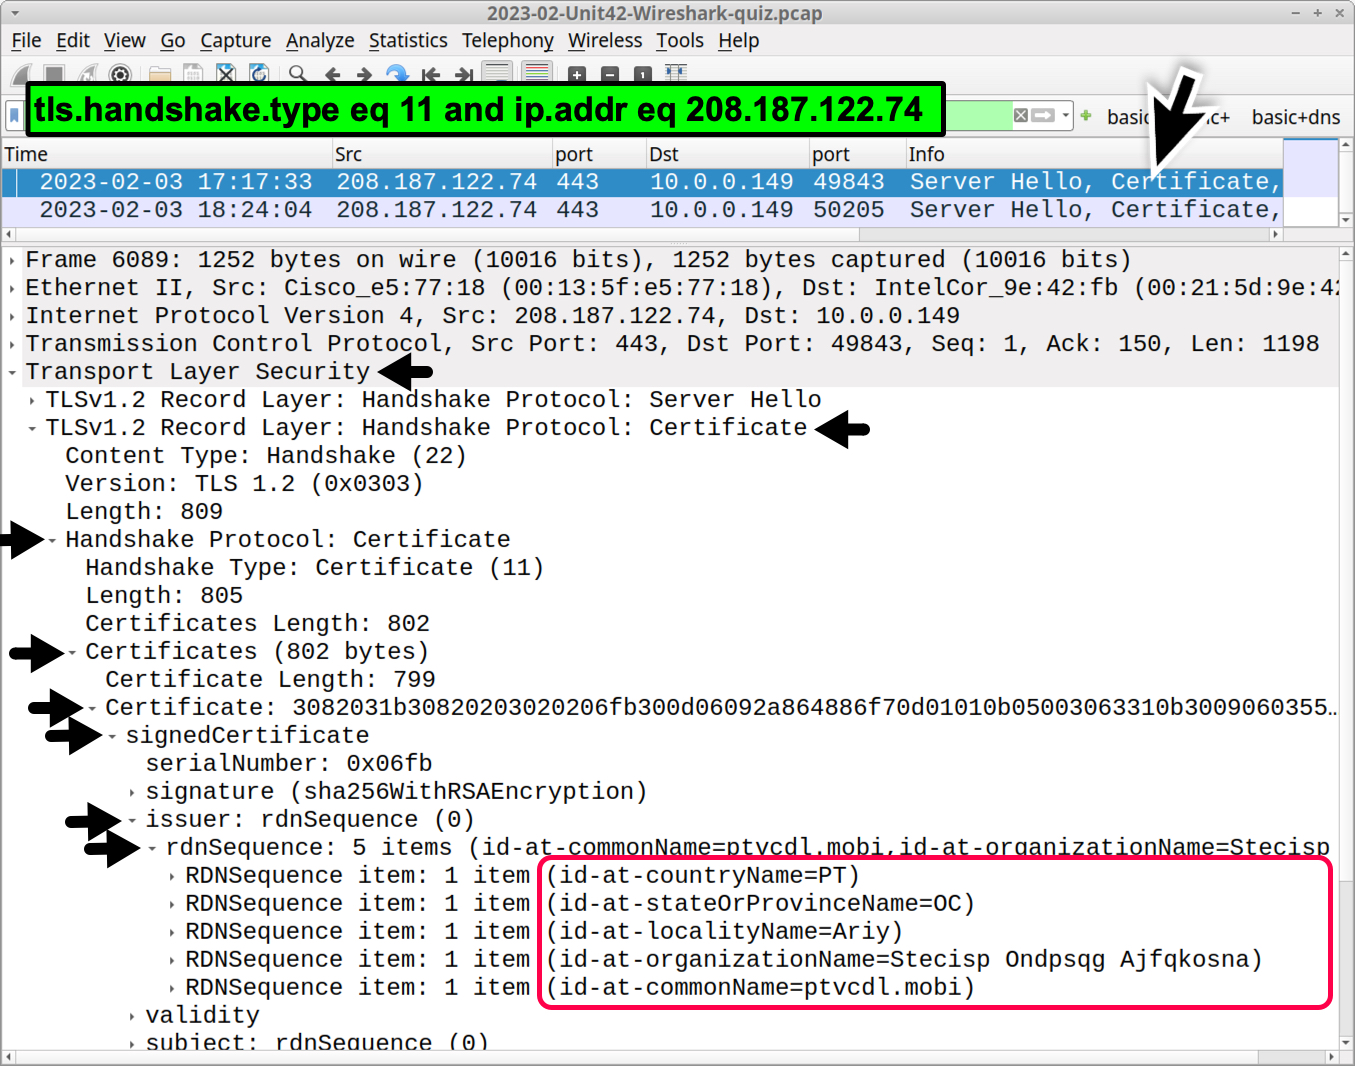 Image 10 is a screenshot of Wireshark highlighting, in red, the rdnSequence section of the certificate issuer data (highlighted with arrows).